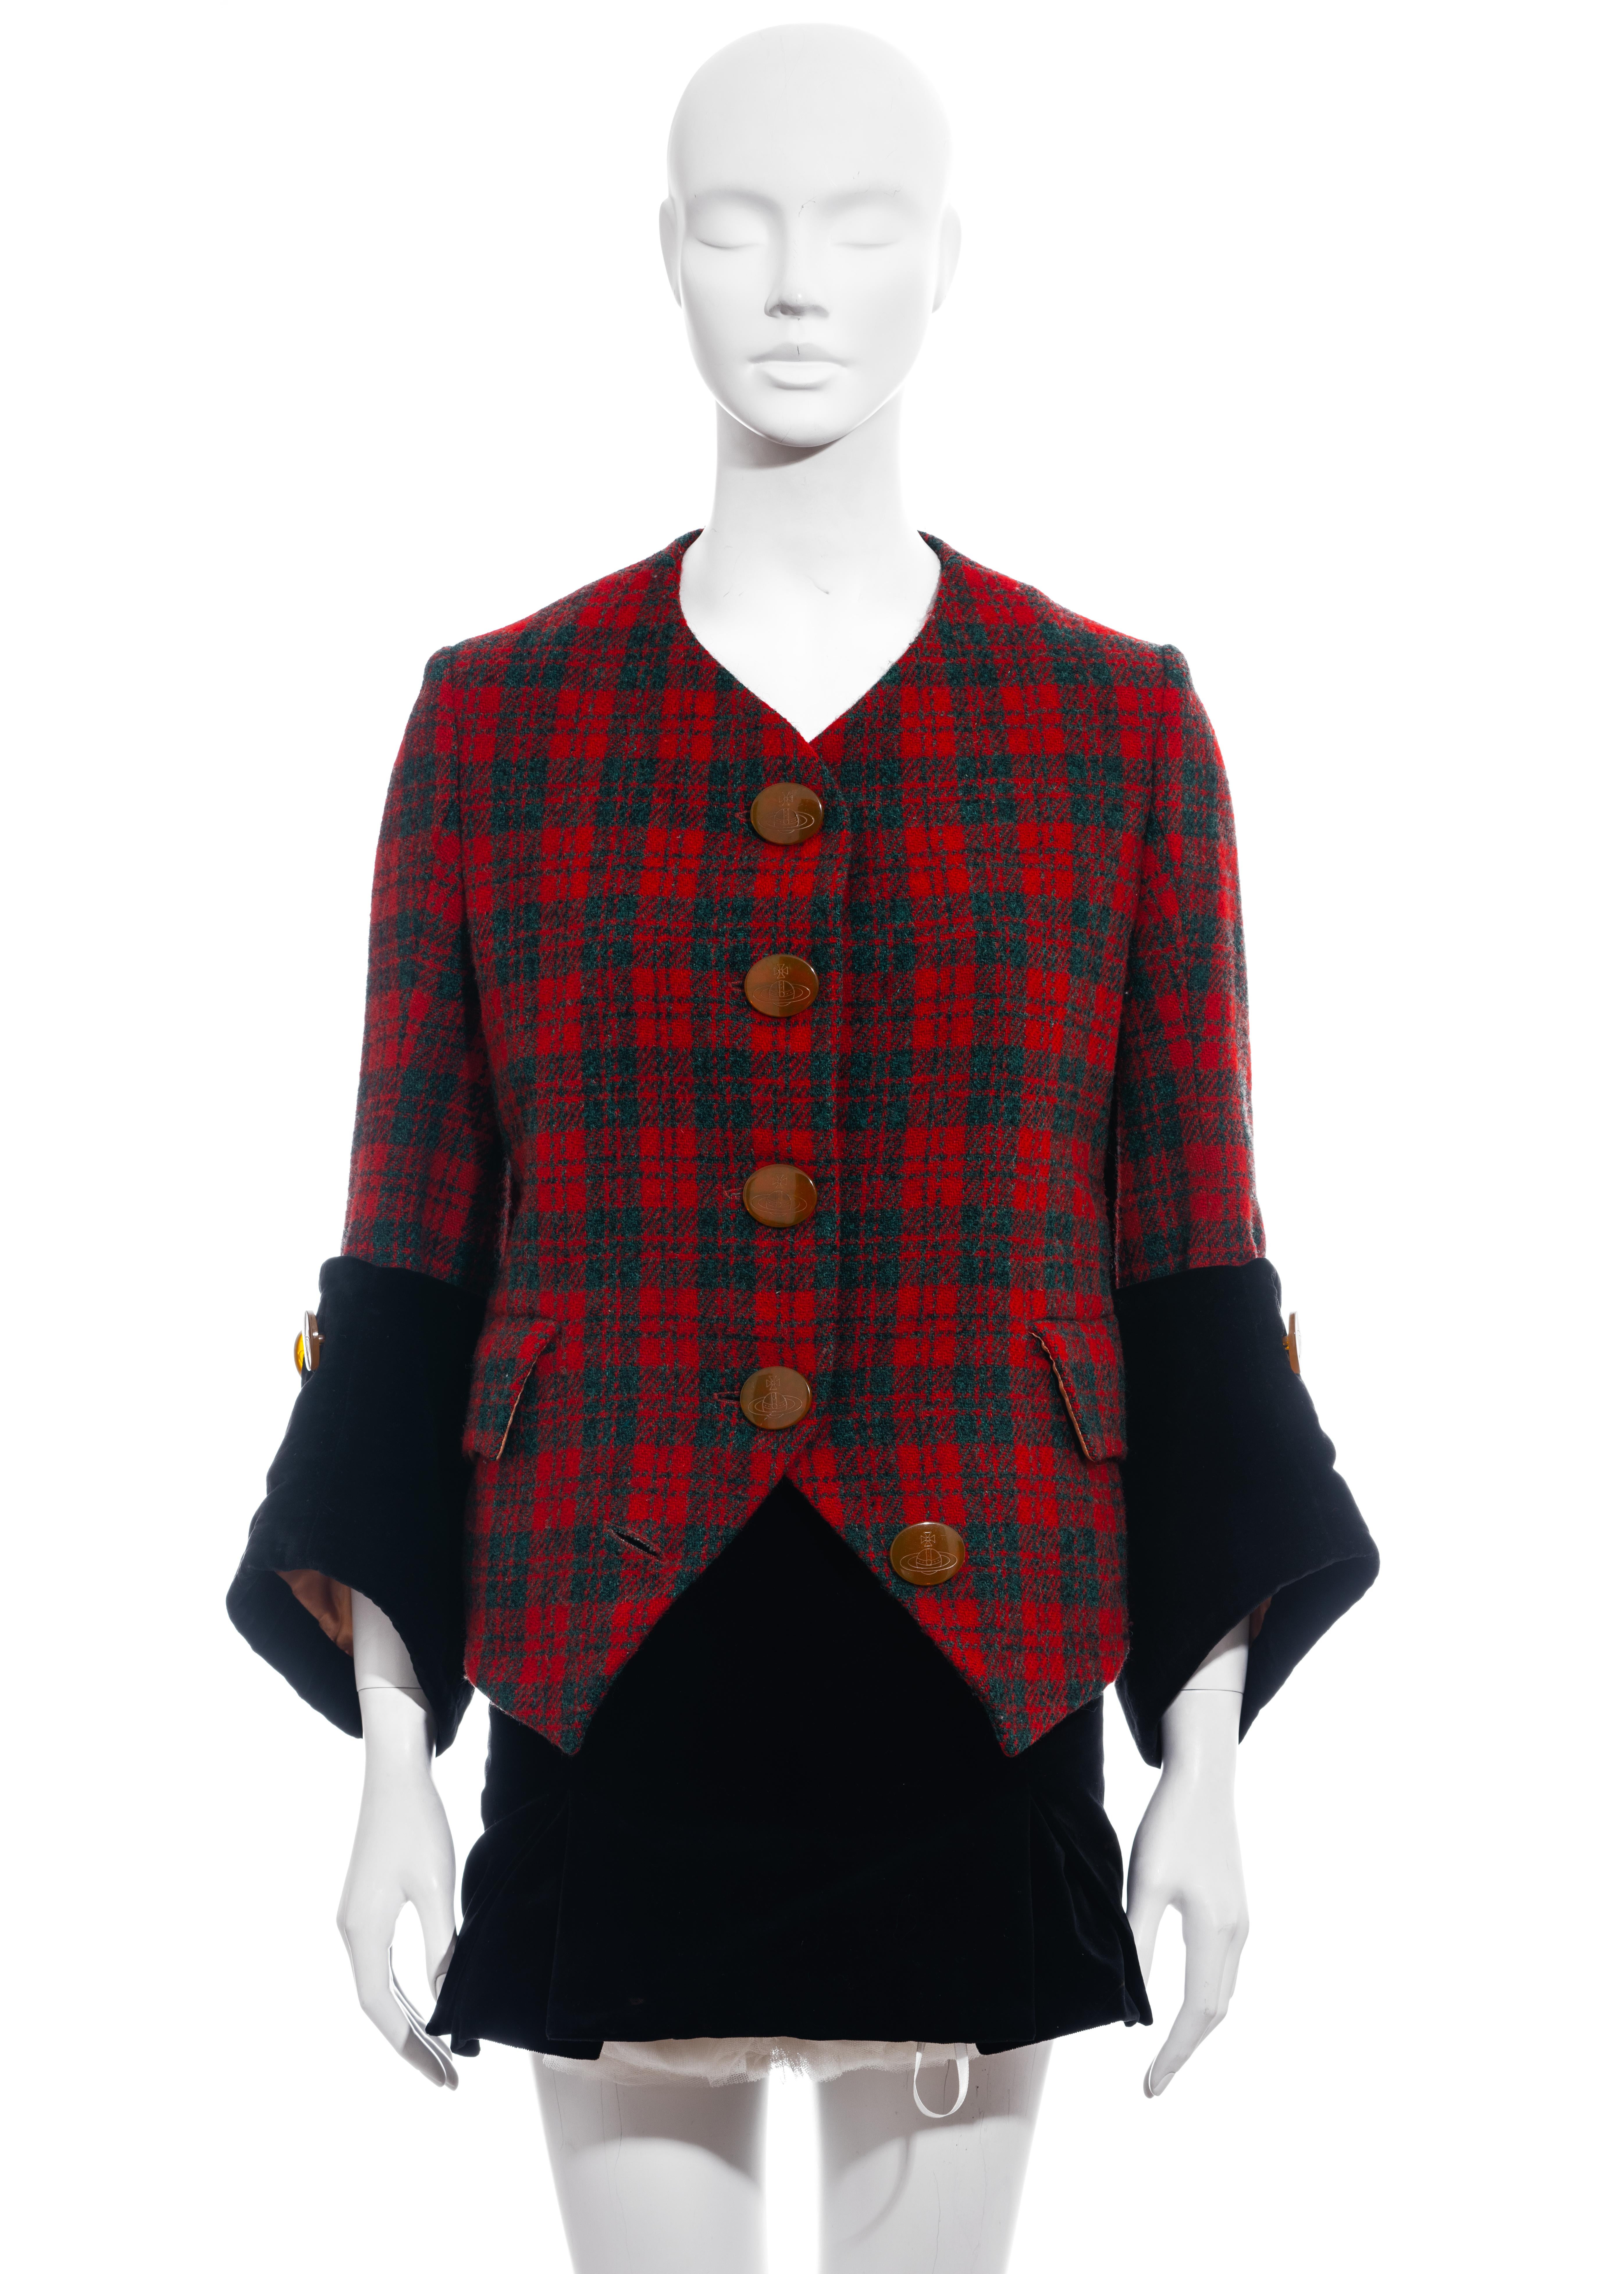 ▪ Vivienne Westwood red checked tweed skirt suit
▪ 100% Wool
▪ Large orb etched buttons 
▪ Large turn-over cuffs 
▪ Black cotton velvet 'kick-out' skirt with tulle petticoat 
▪ FR 38 - UK 10 - US 6
▪ Fall-Winter 1991